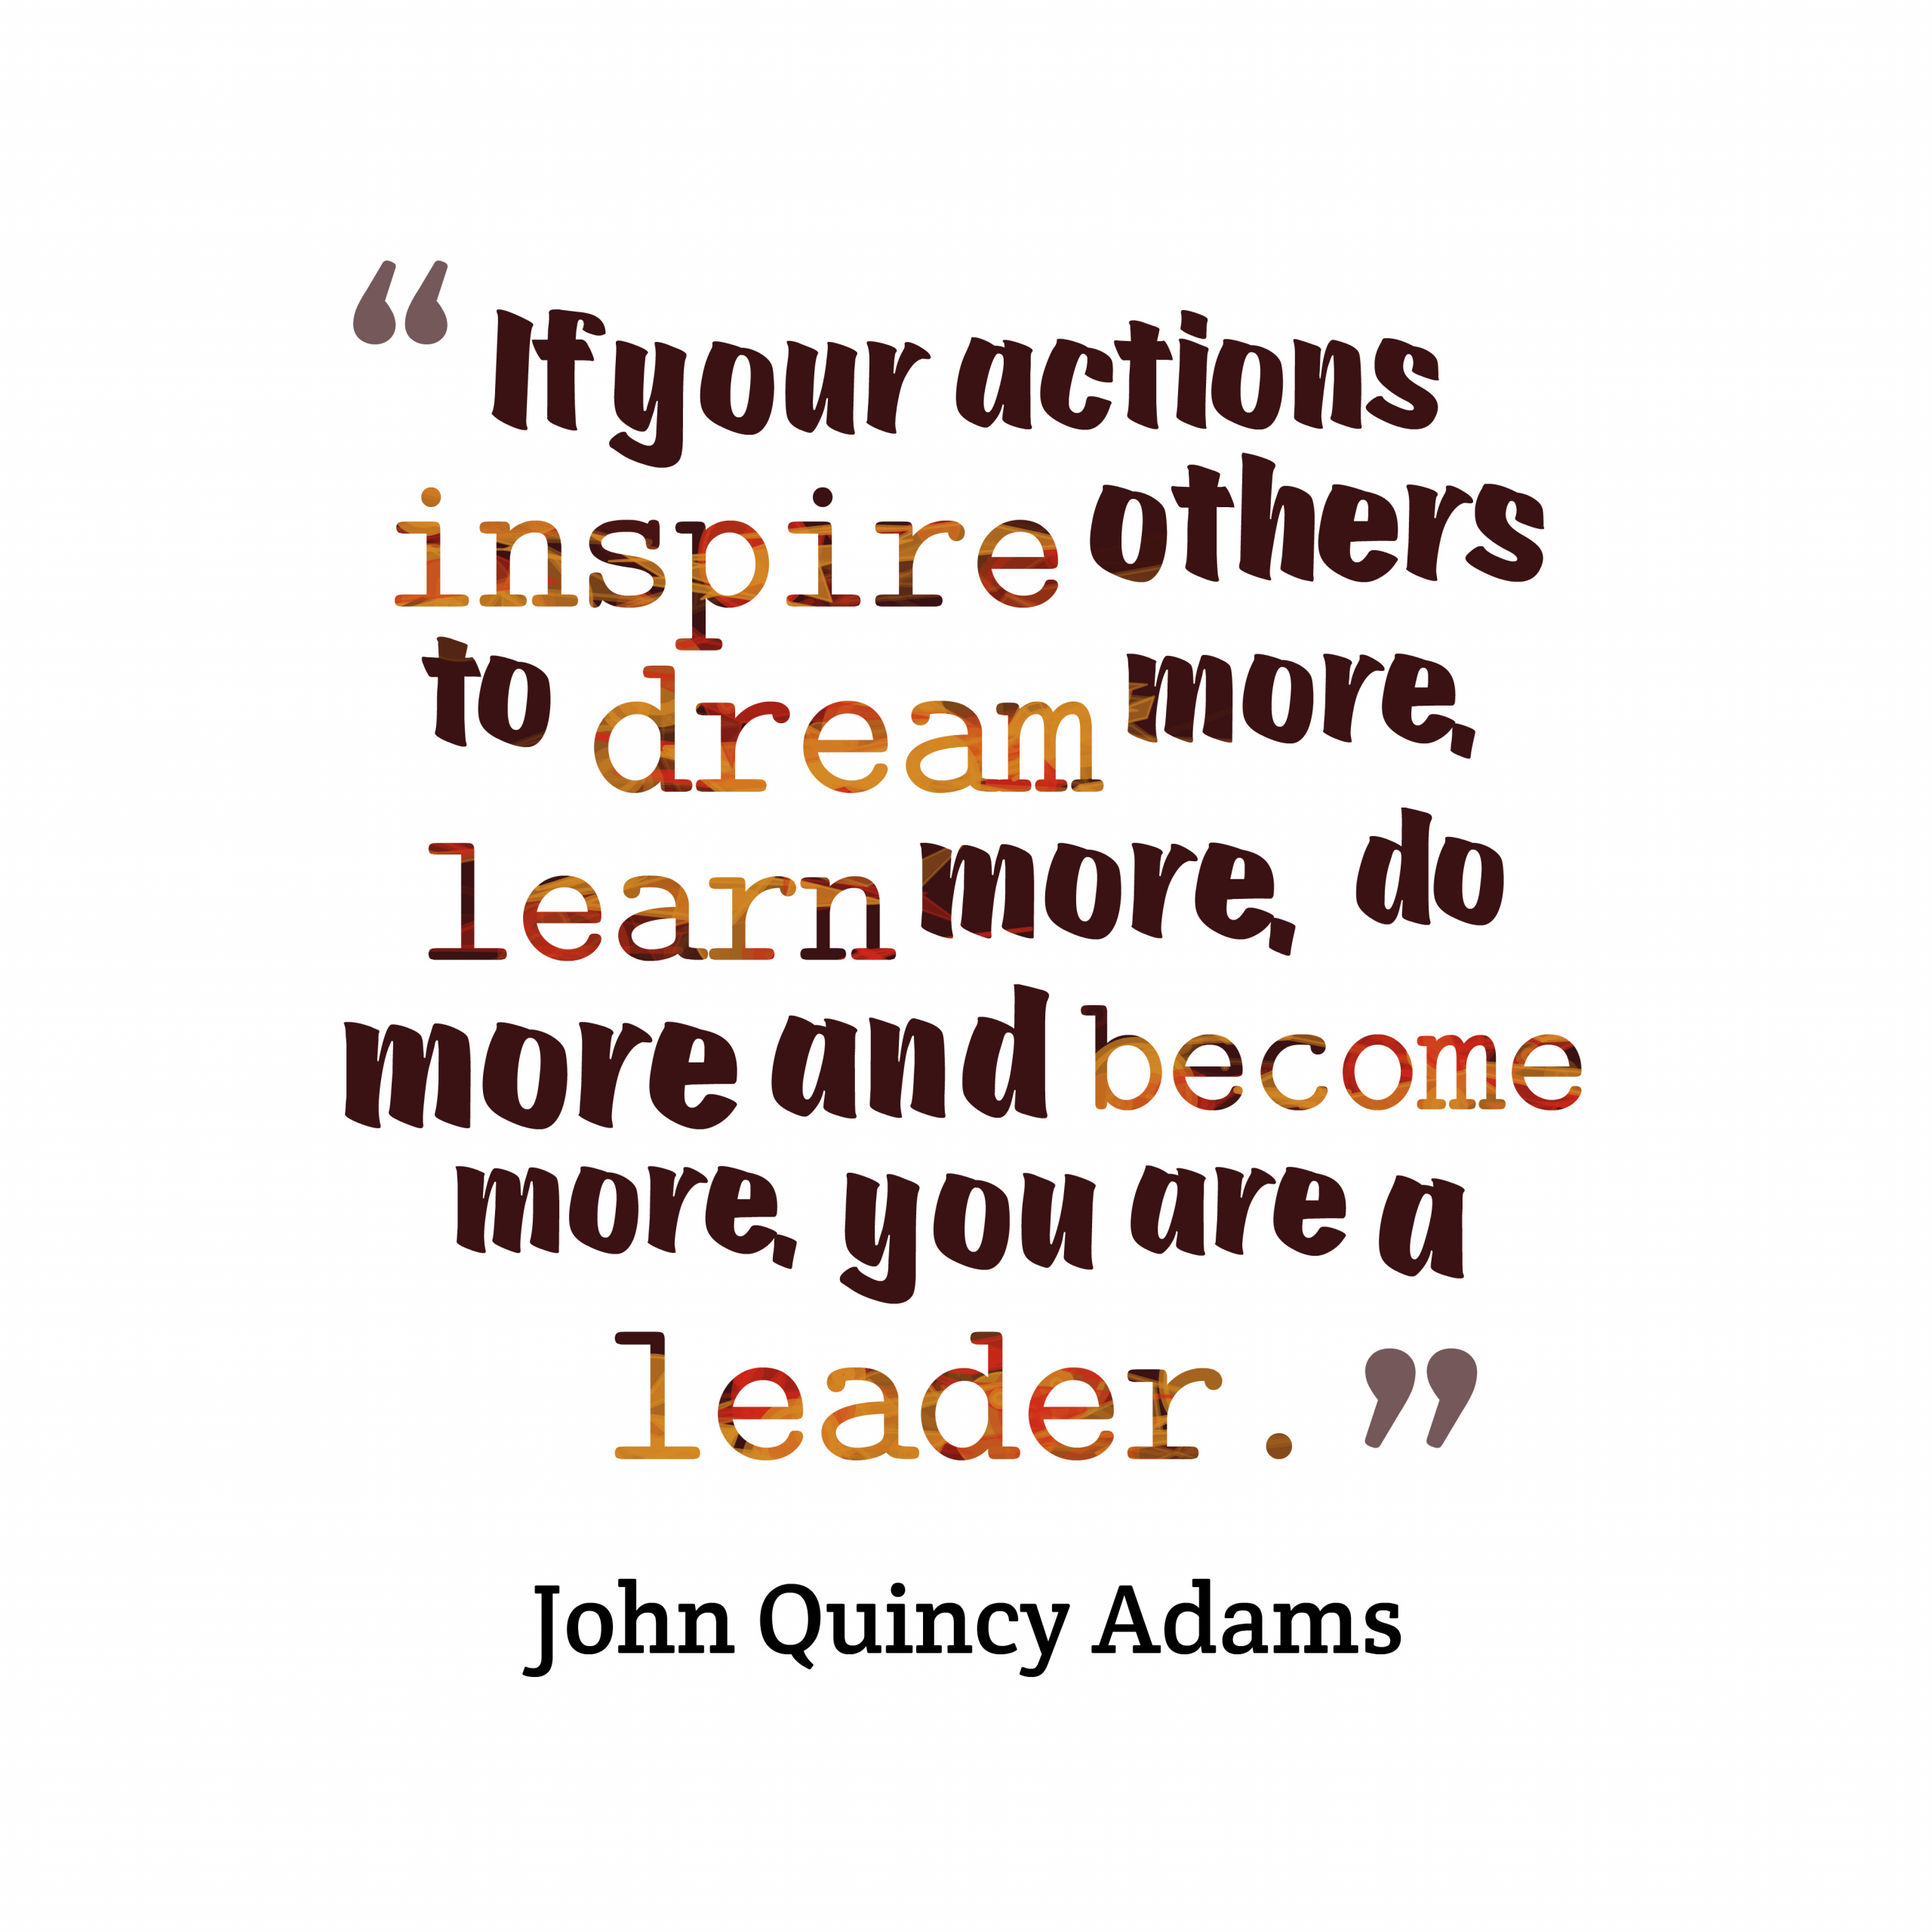 John Quincy Adams Leadership Quote
 The Leader In Me Call for Quotes and Words of Inspiration